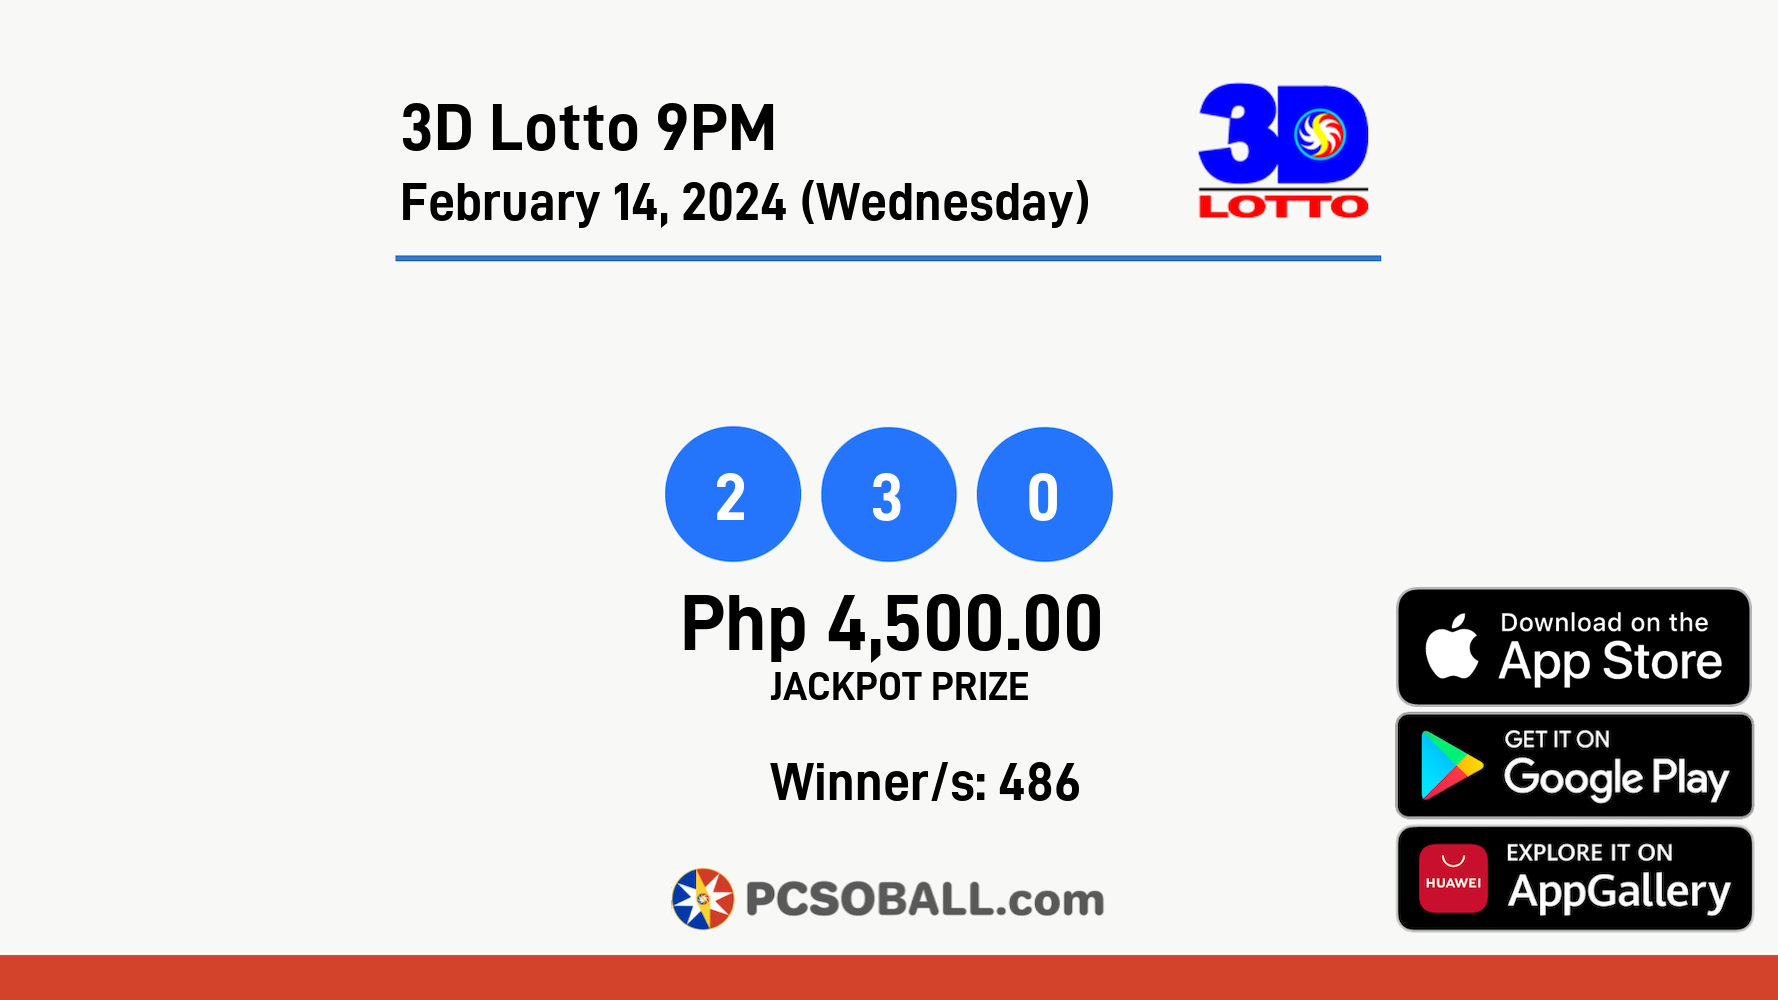 3D Lotto 9PM February 14, 2024 (Wednesday) Result